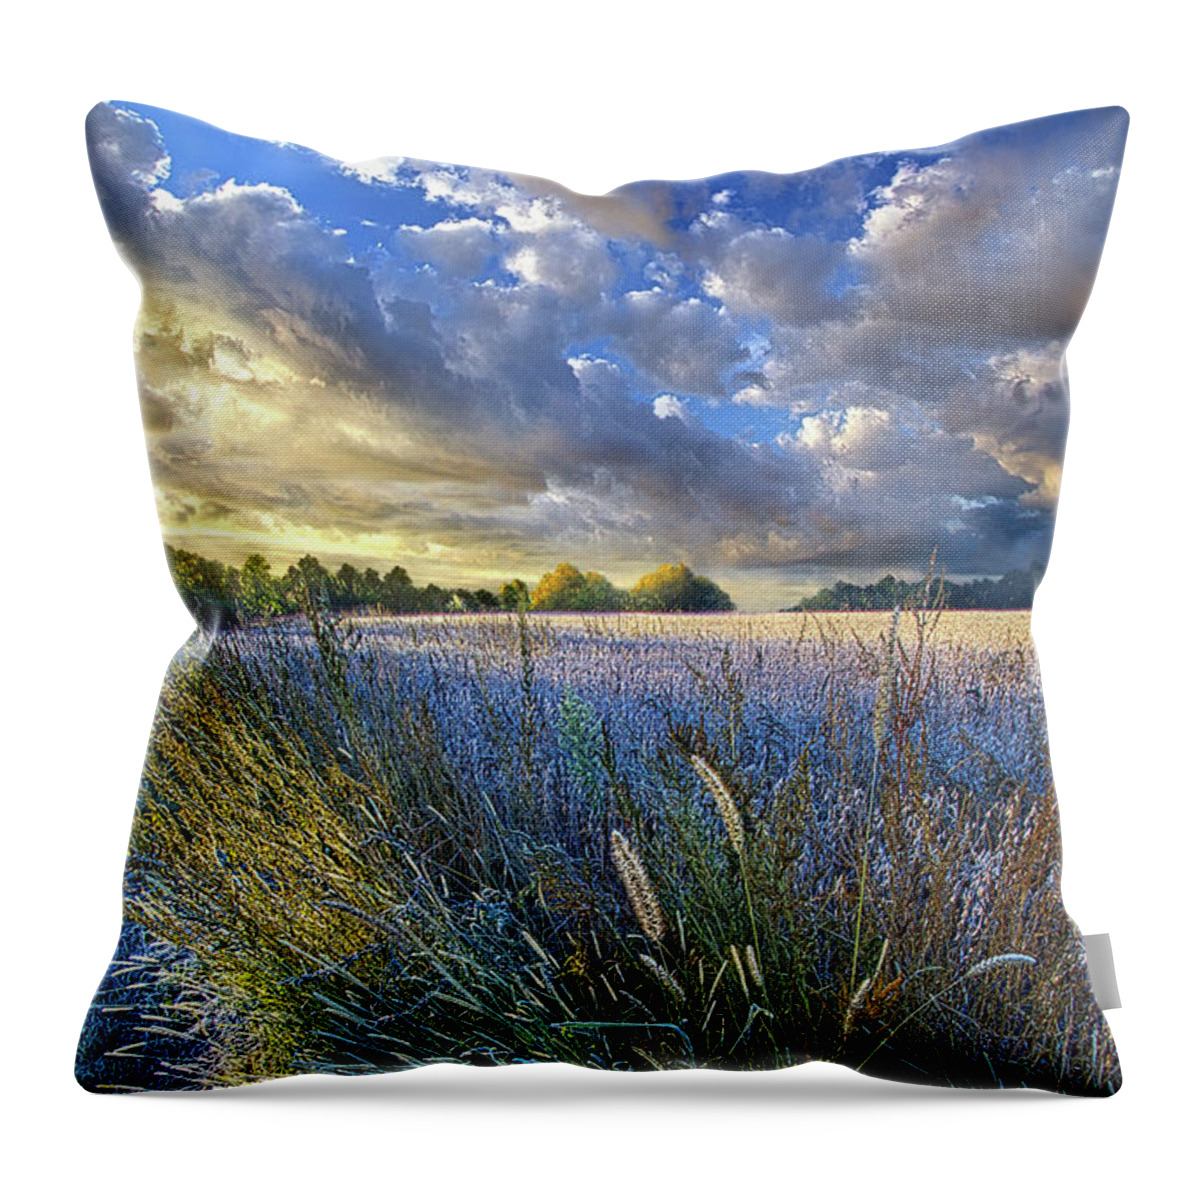 Life Throw Pillow featuring the photograph Obscuring Summer's Memory by Phil Koch